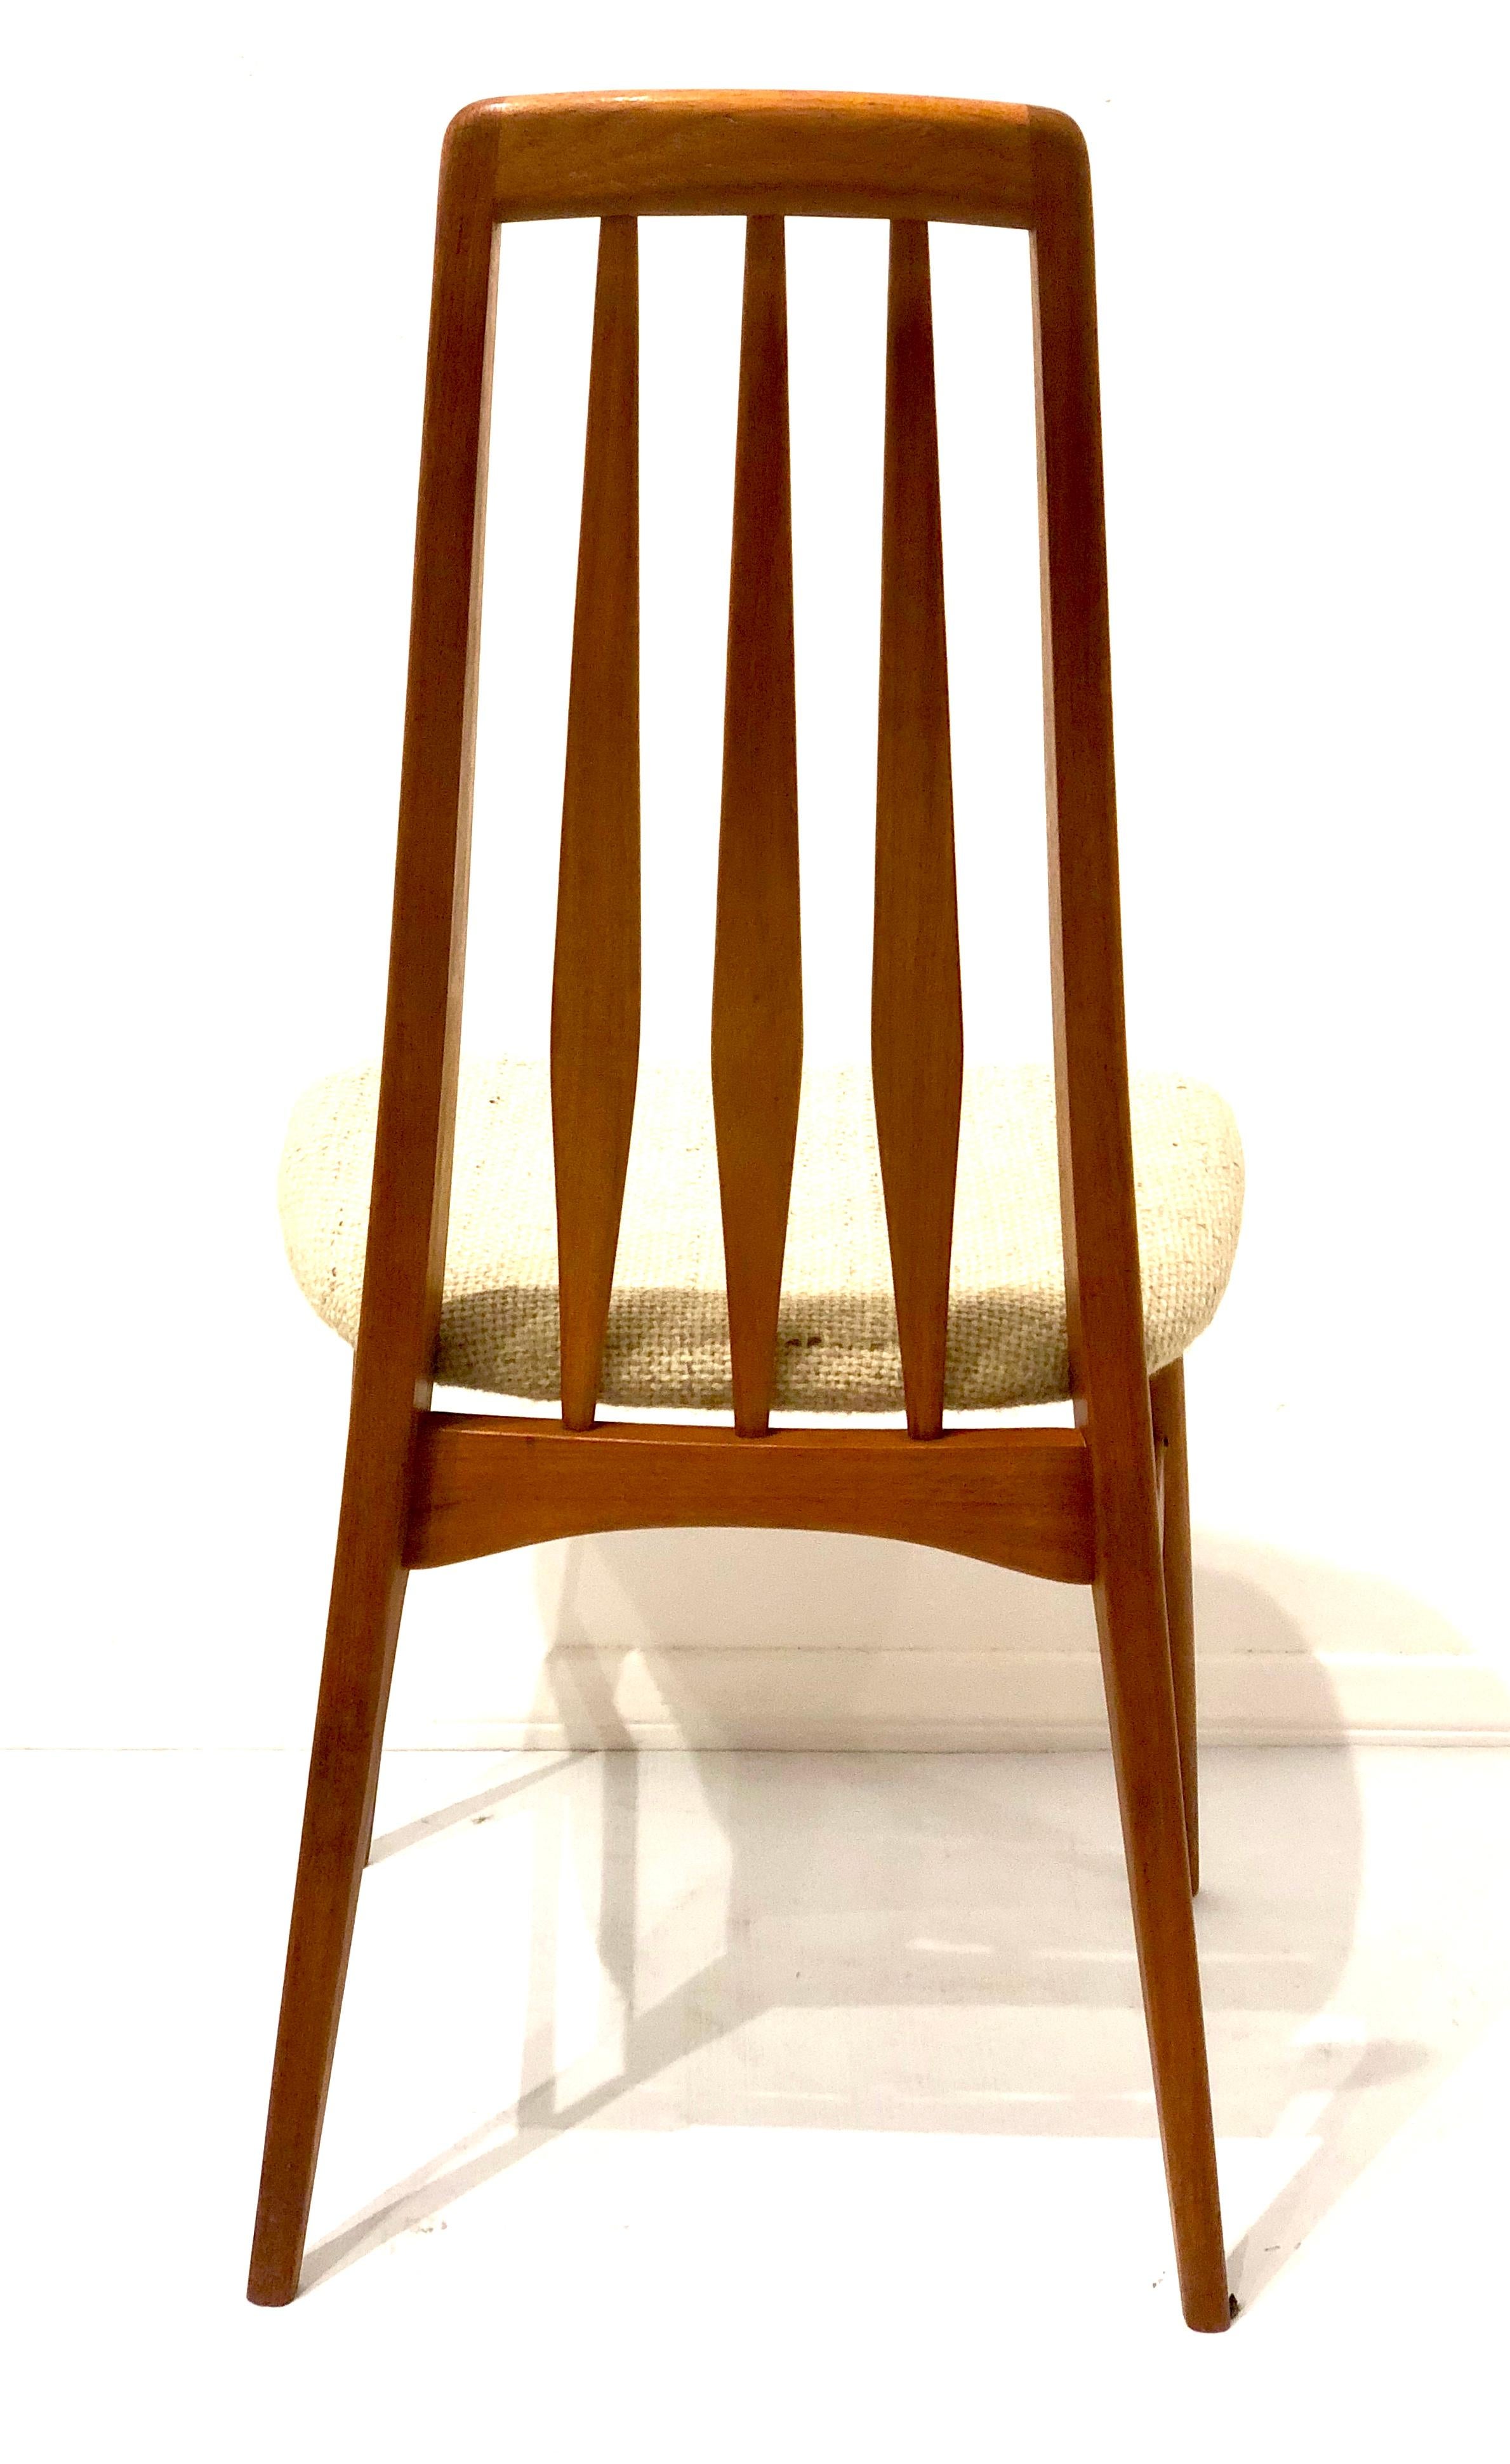 Elegant lines and beauty on this single tall back chair design by Niels Koefoed, famous Eva chair, solid teak solid and sturdy in its original fabric in an oatmeal color.